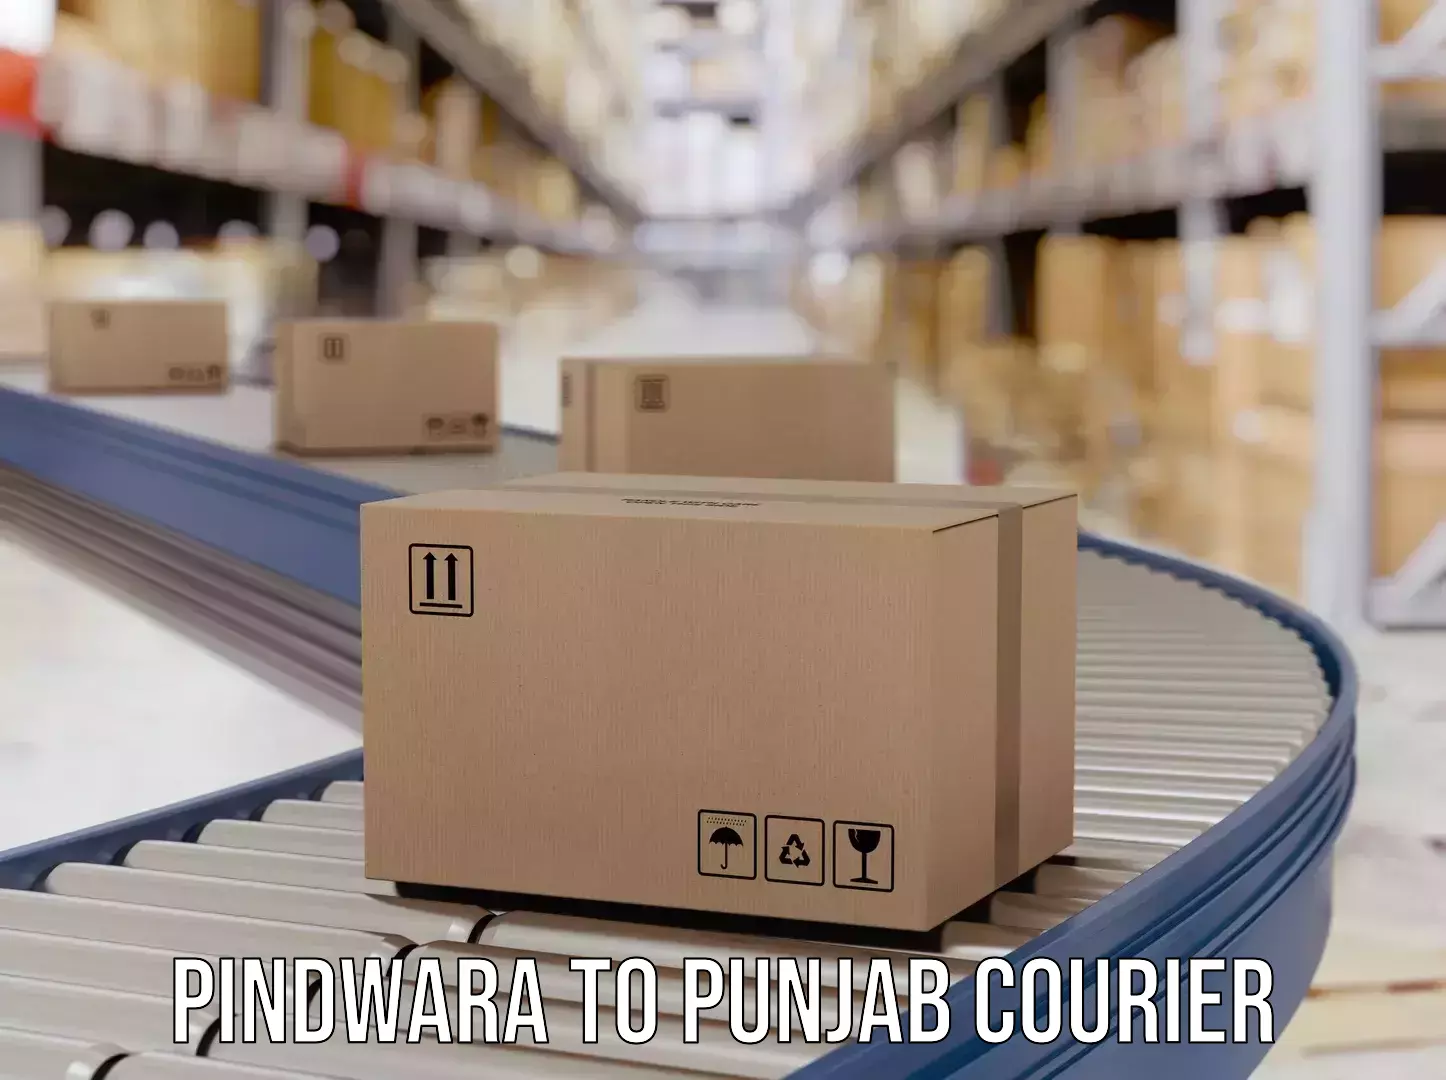 Overnight delivery services Pindwara to Sangrur